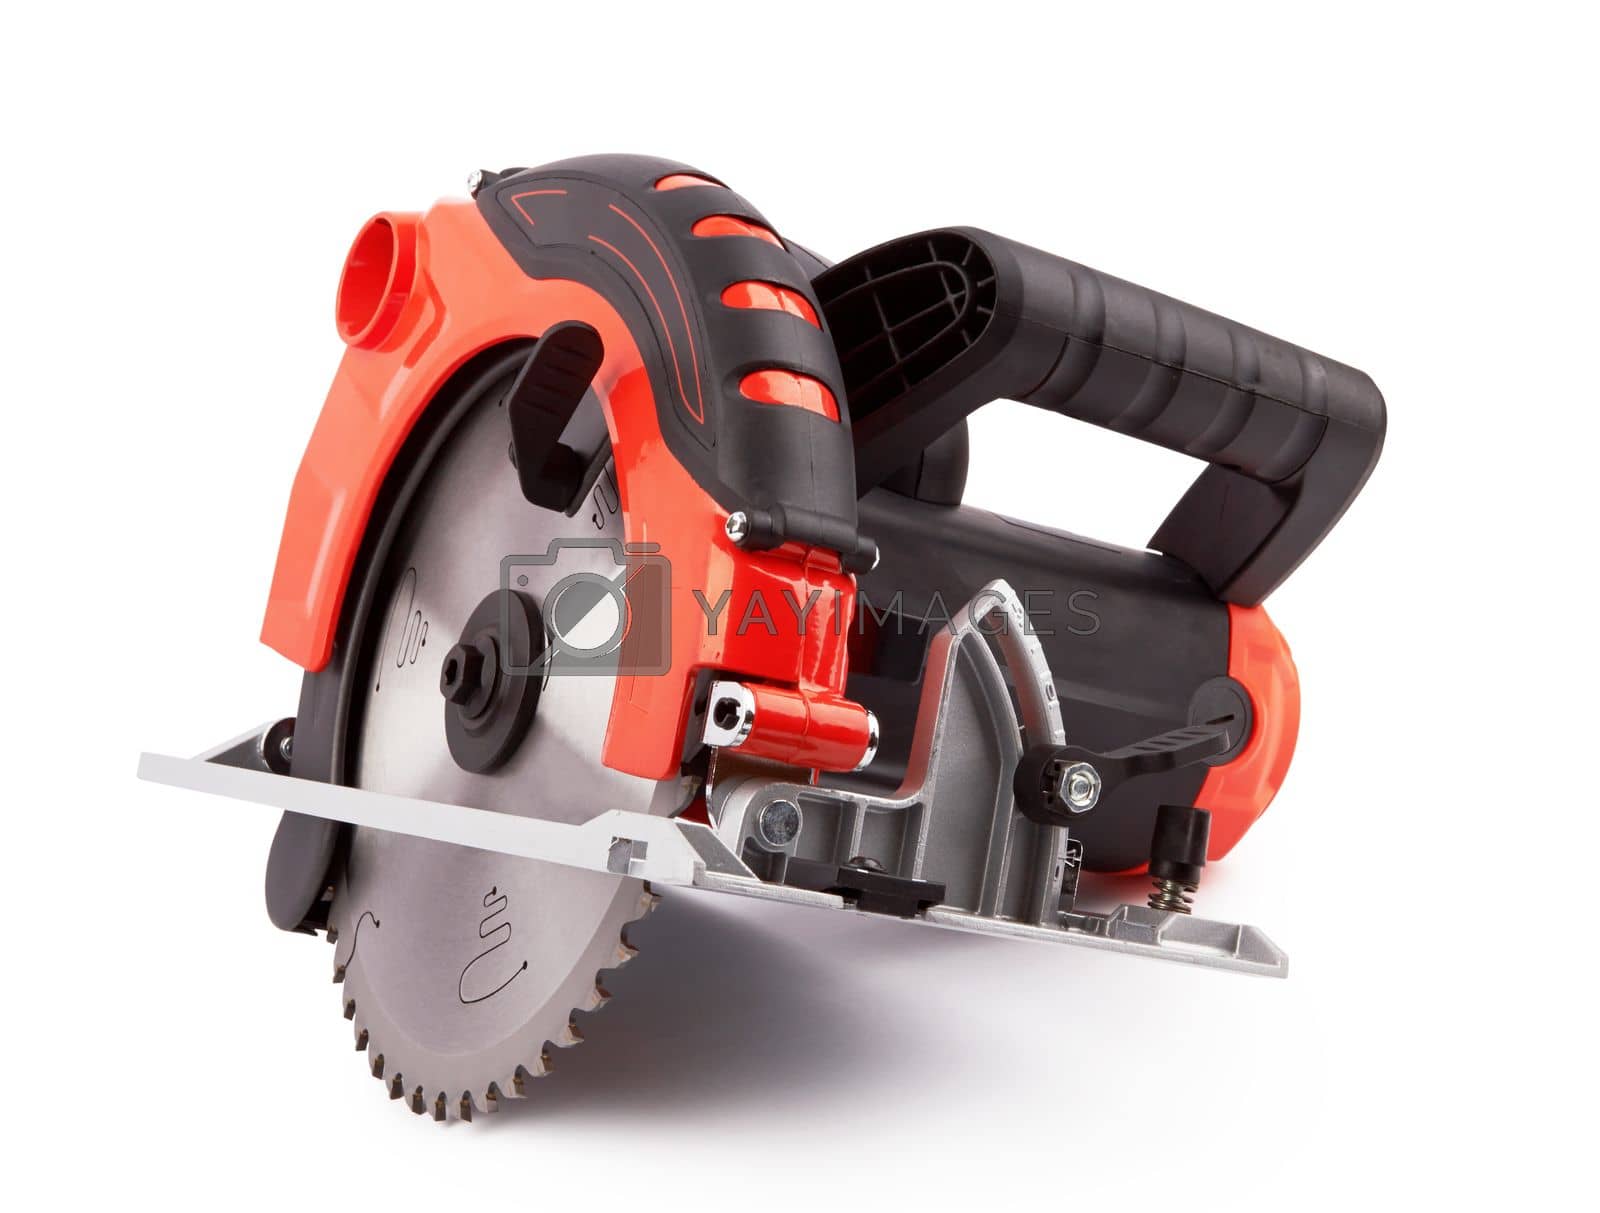 Royalty free image of Power tools circular saw by pioneer111